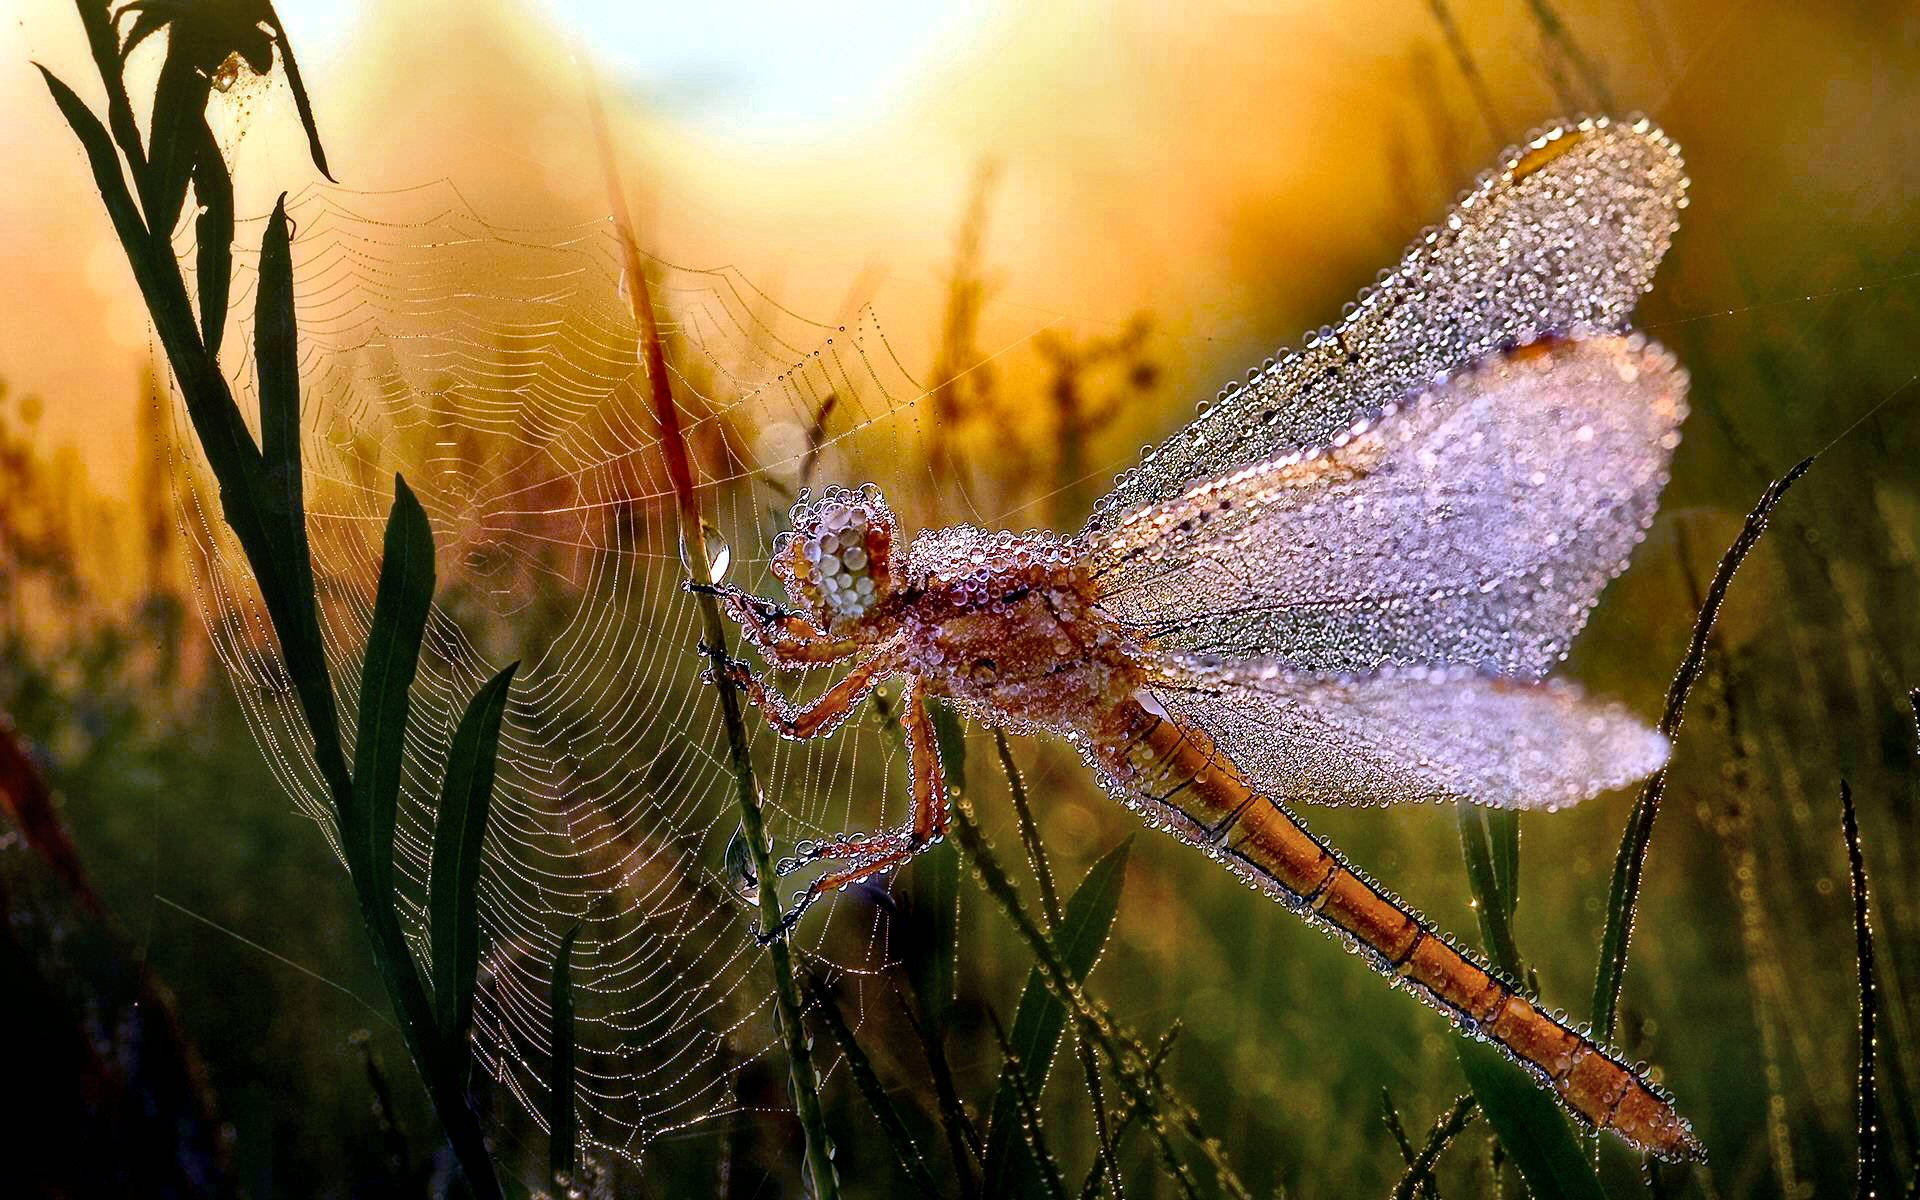 Insect Dragonfly Caught In Web